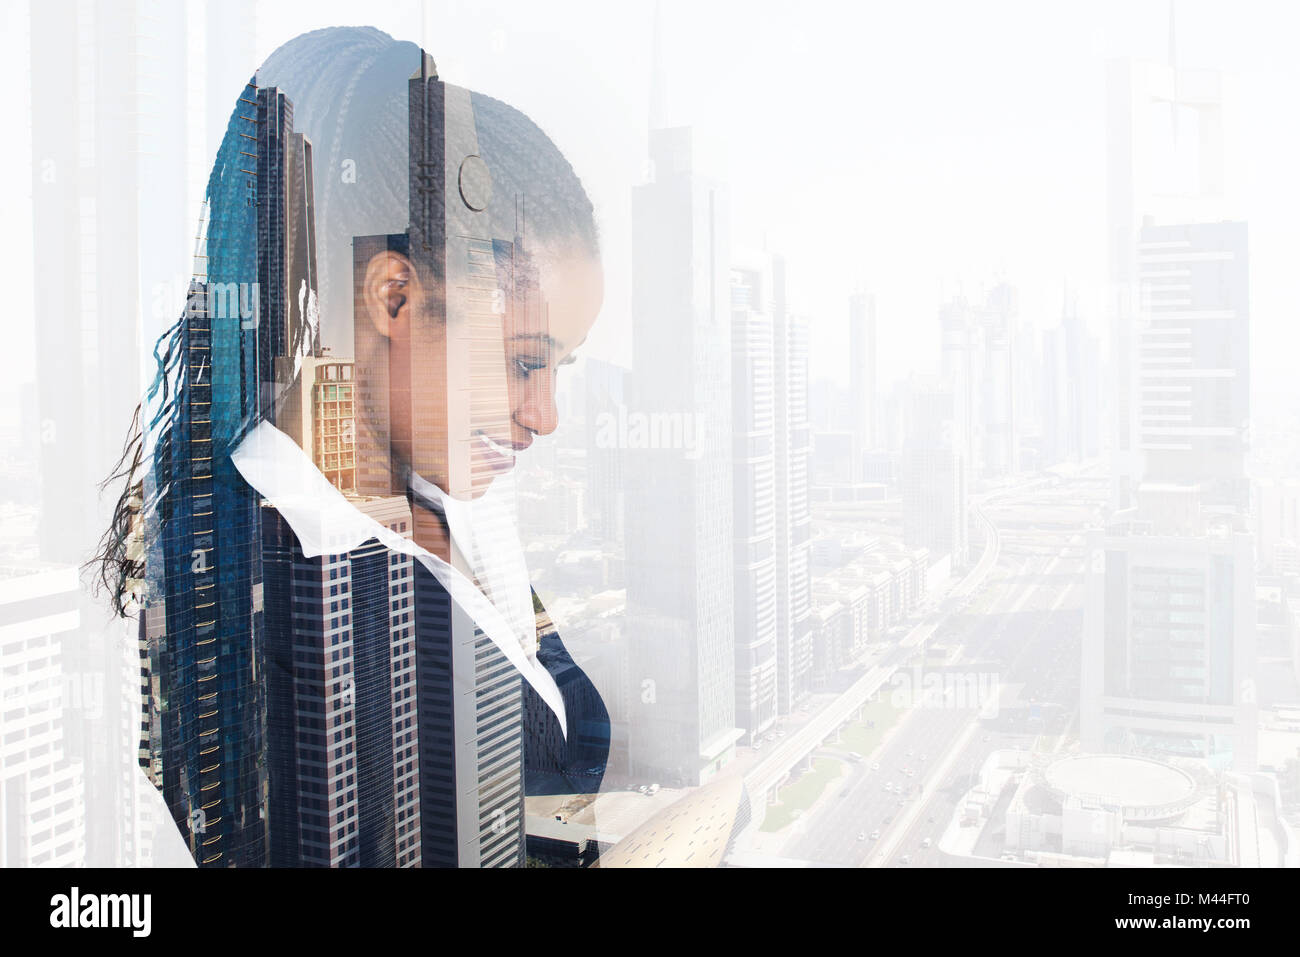 Digital composite image of young businesswoman smiling over city background Stock Photo